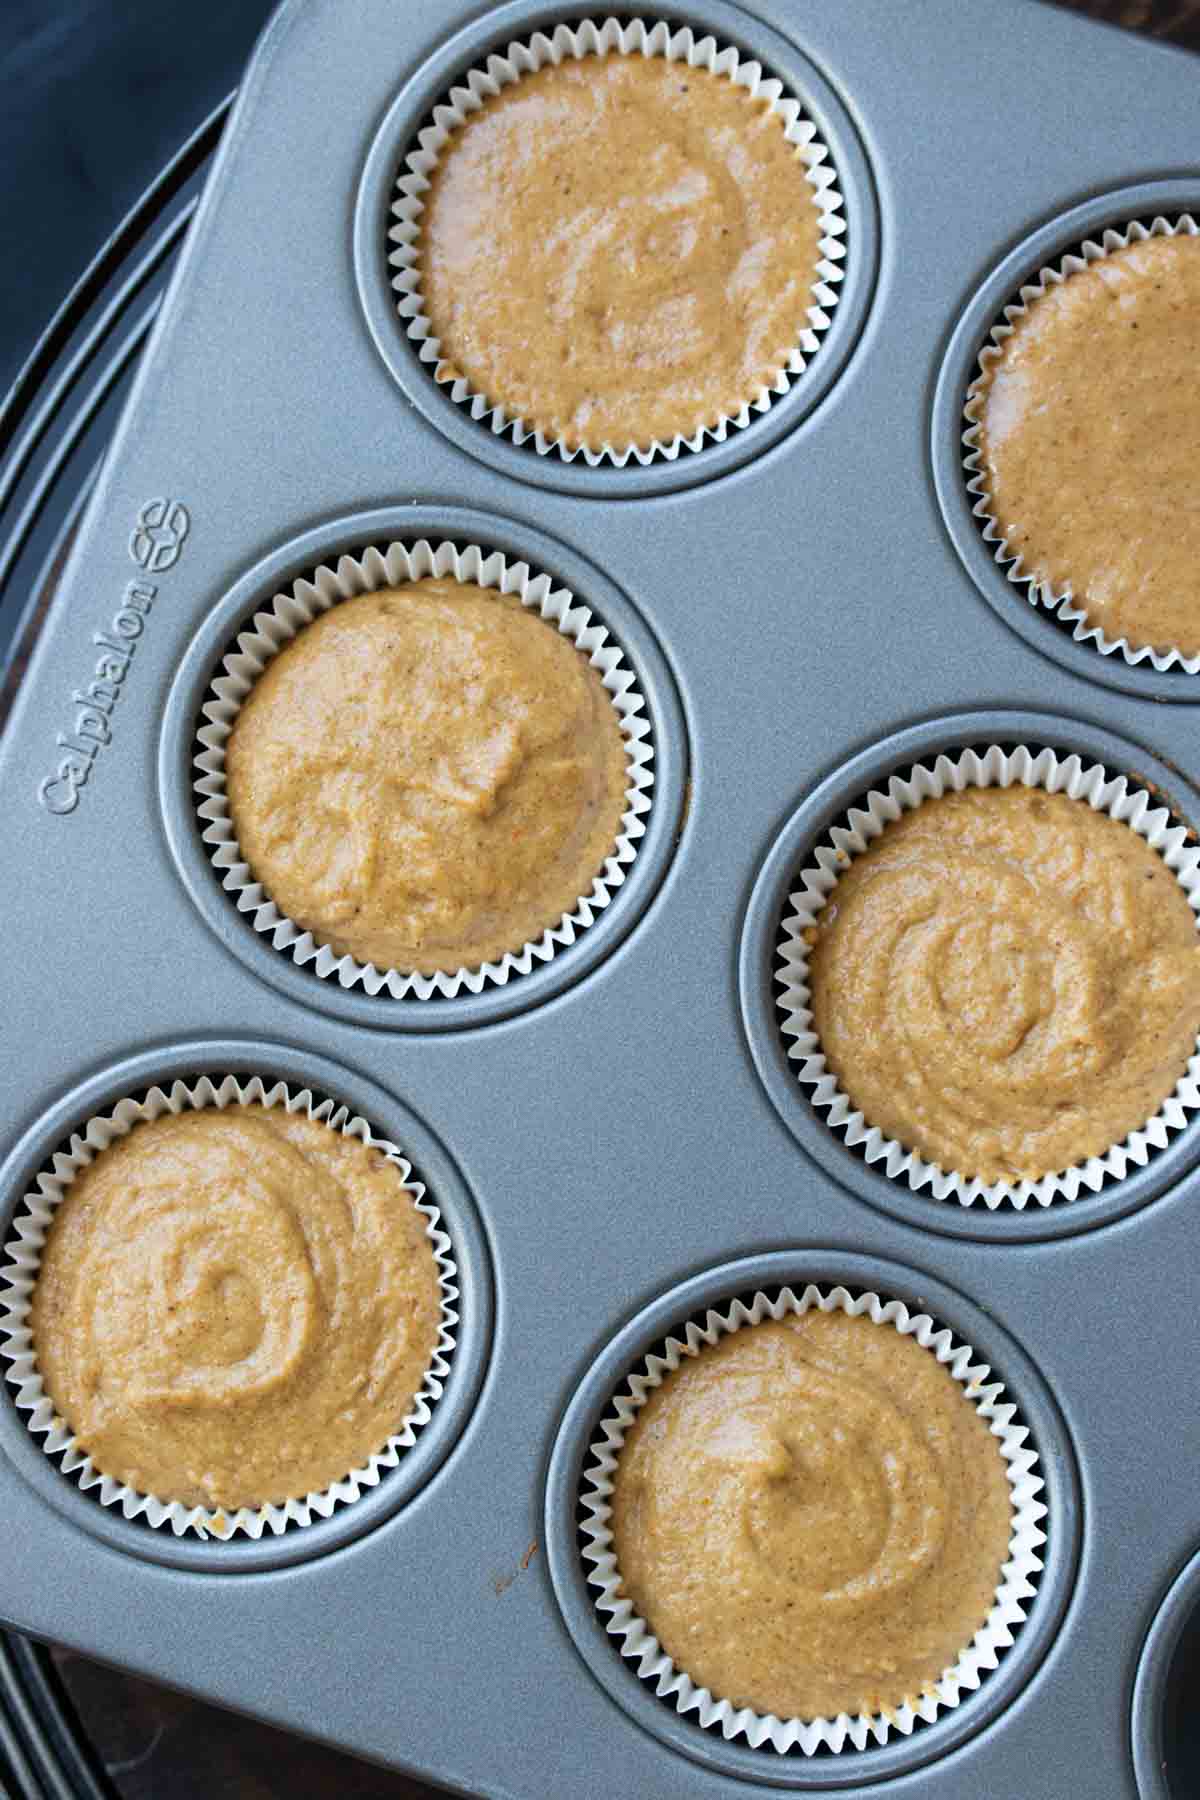 Top view of baking cups filled with pumpkin cupcake batter in muffin pan